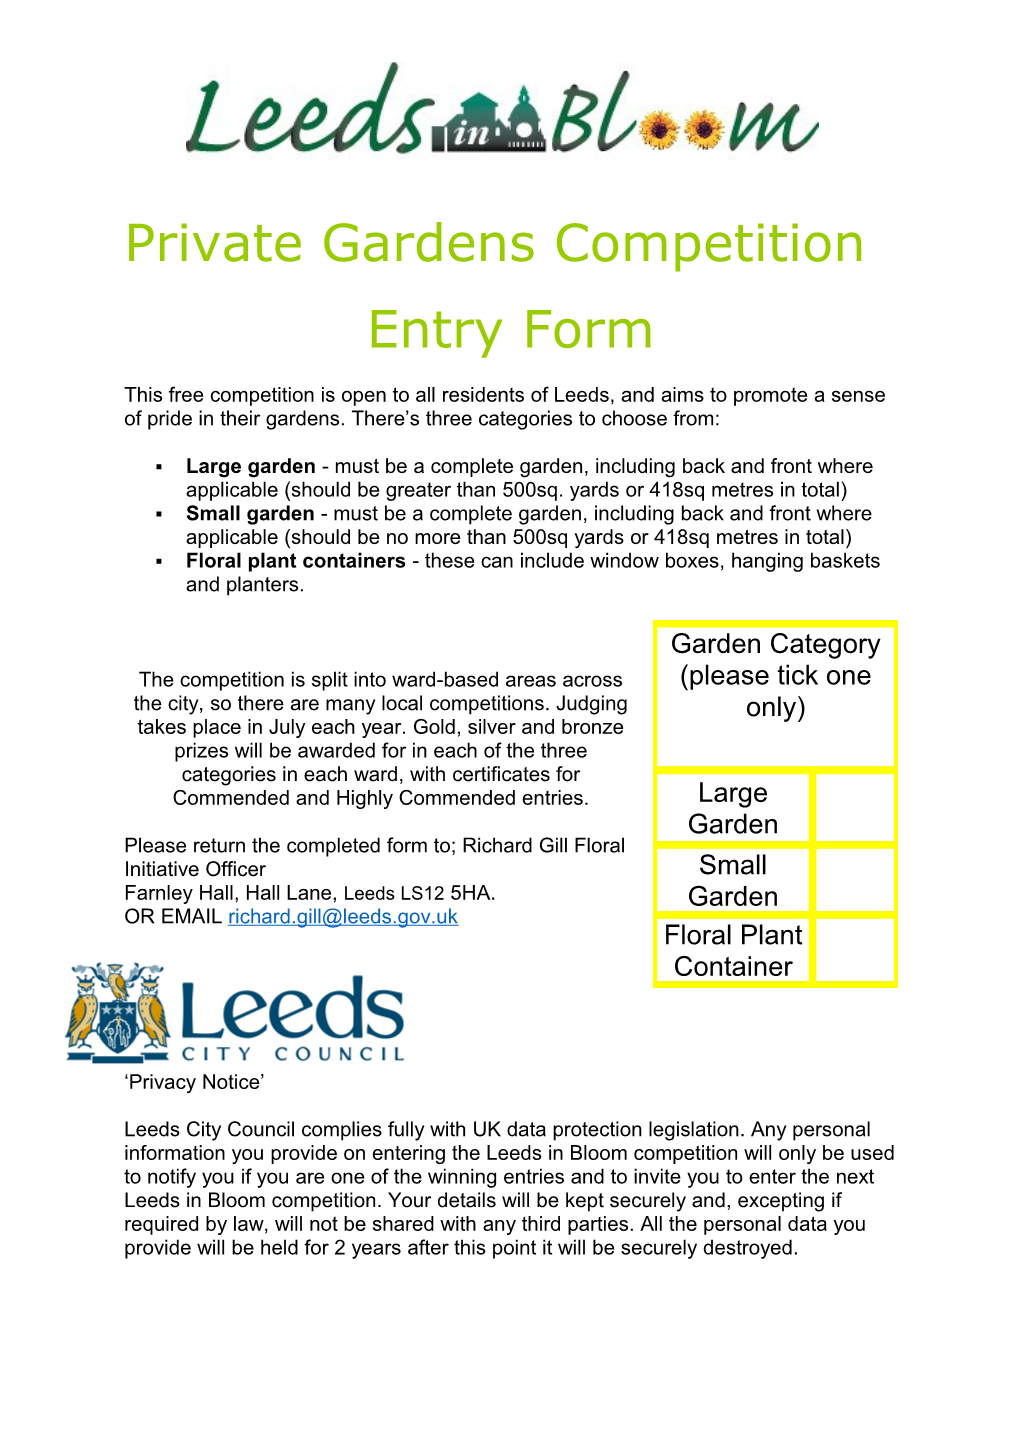 Private Gardens Entry Form